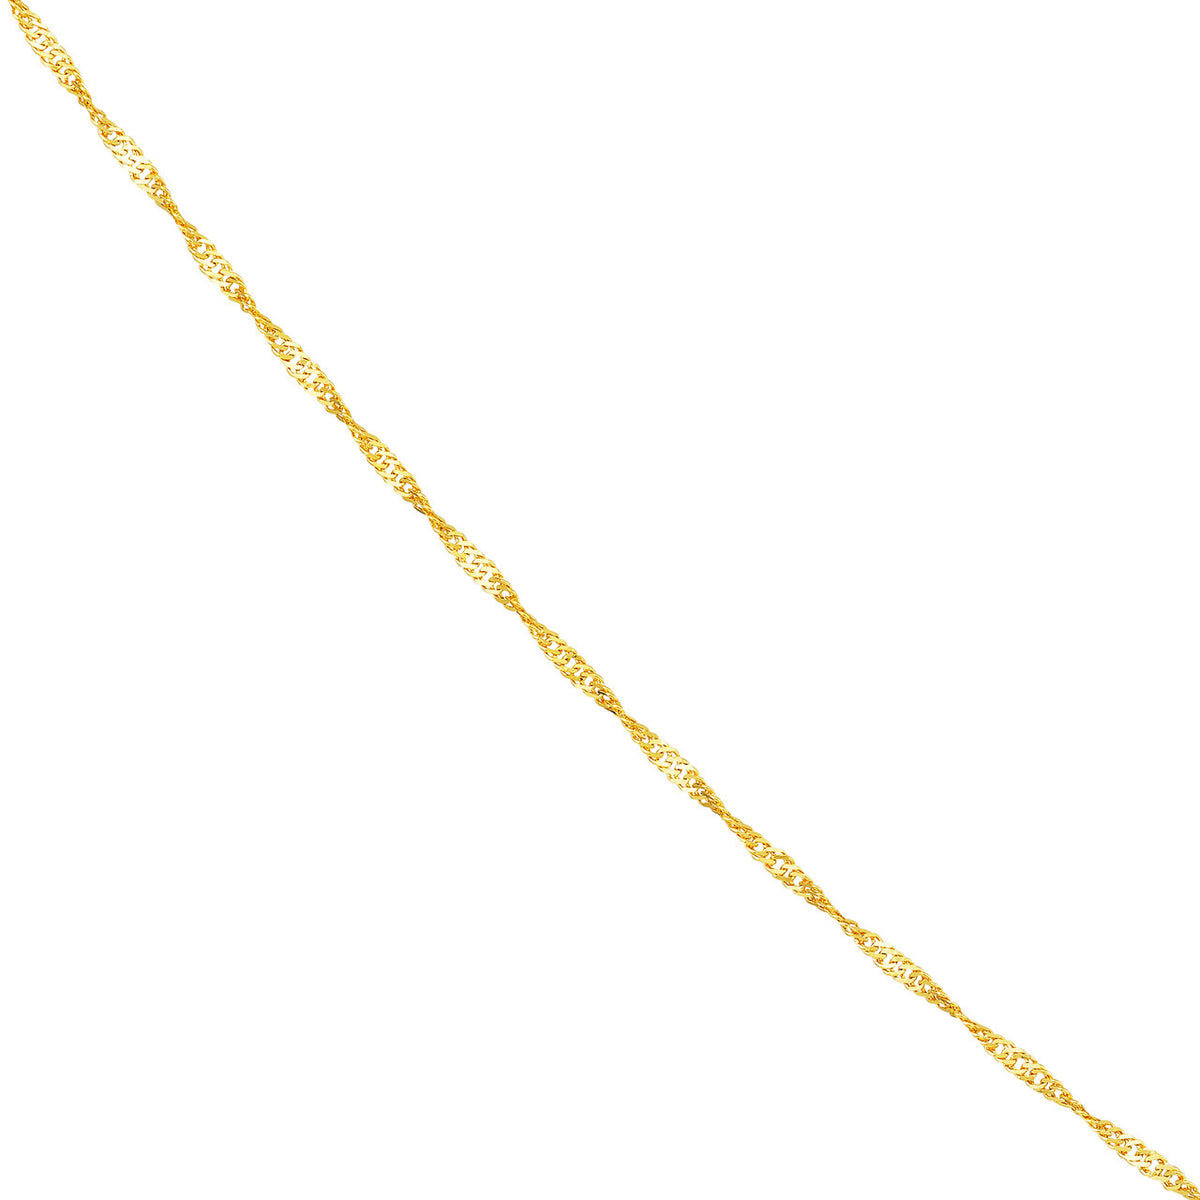 14K Yellow Gold or White Gold 1mm Singapore Chain Necklace with Spring Ring